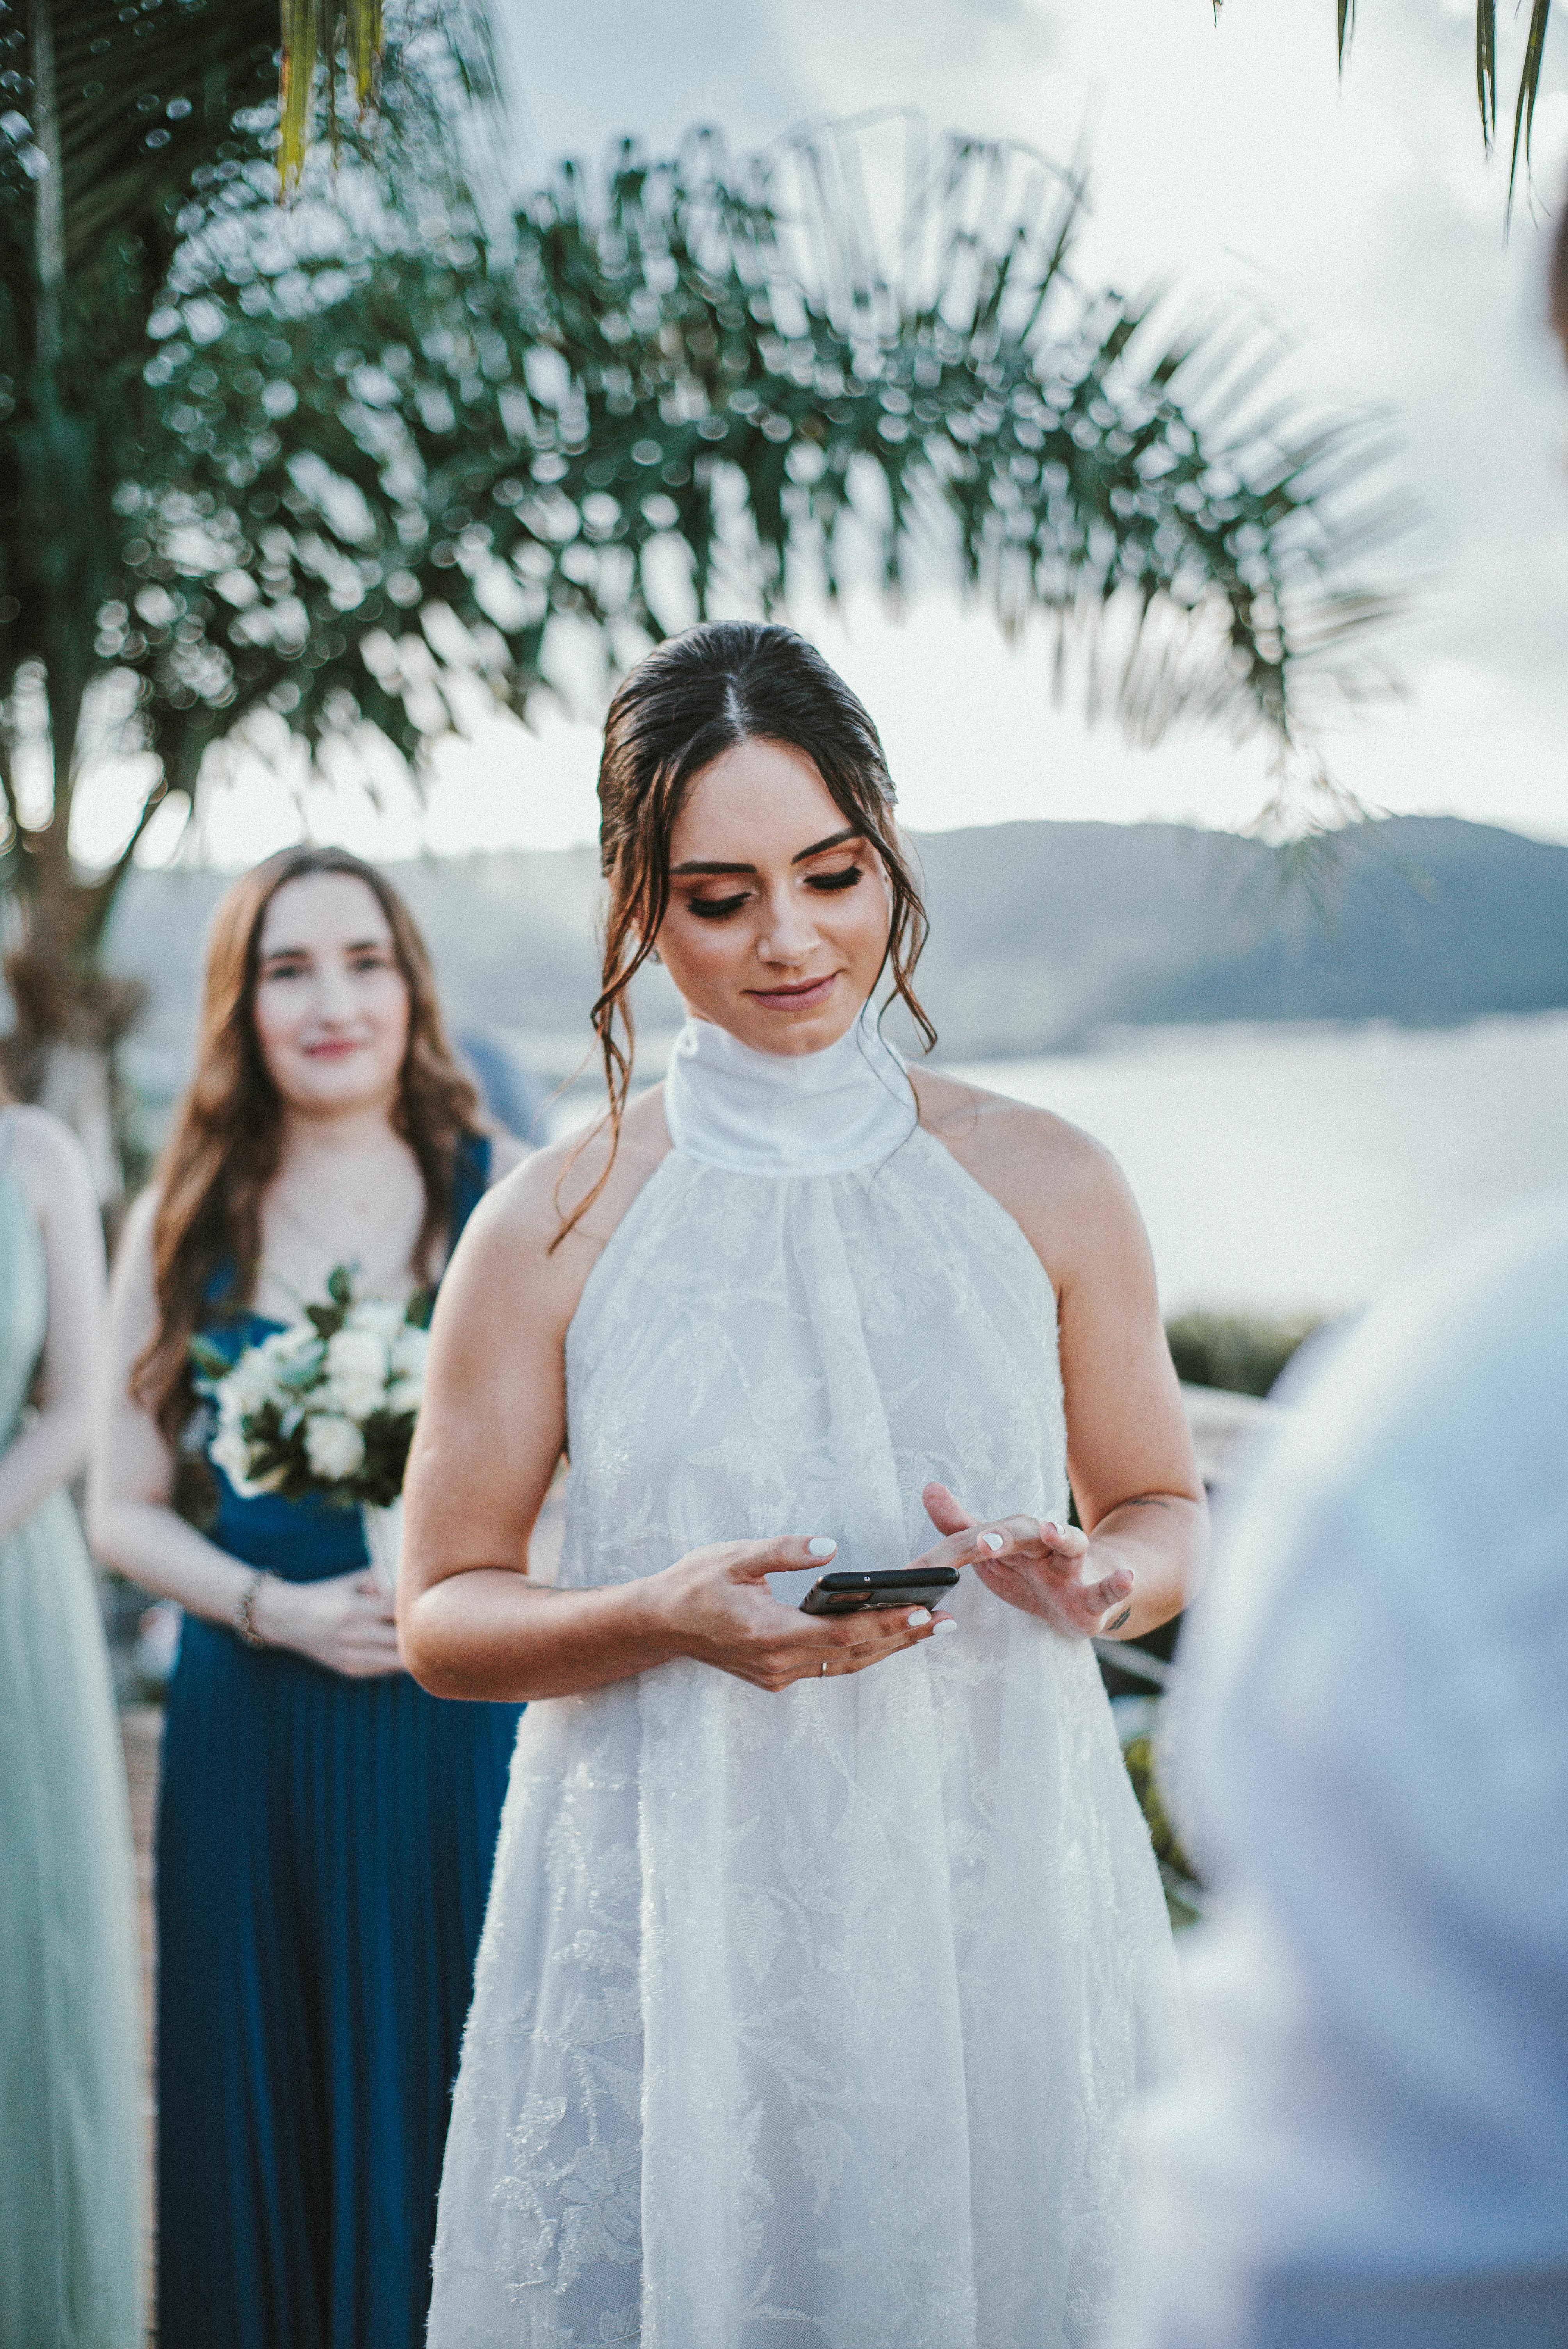 A bride holding a and using phone on her wedding day | Source: Pexels